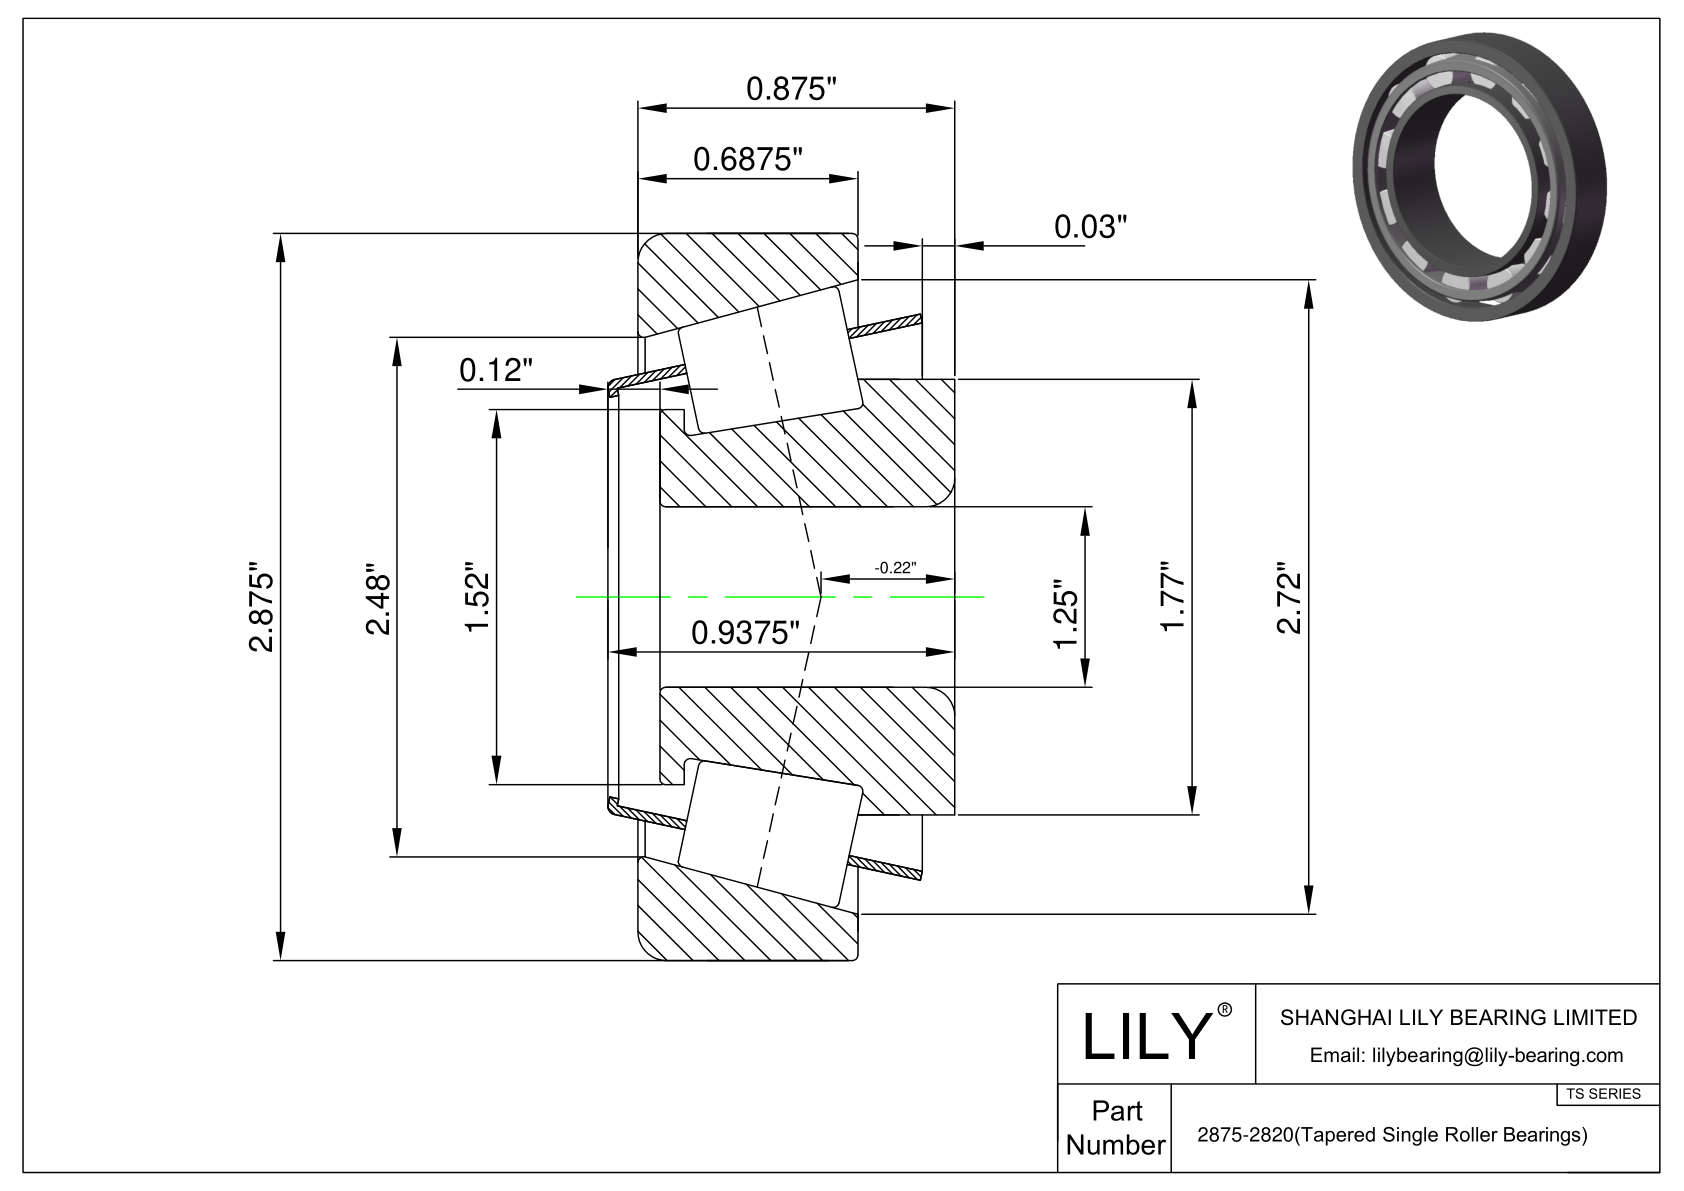 2875-2820 TS (Tapered Single Roller Bearings) (Imperial) cad drawing